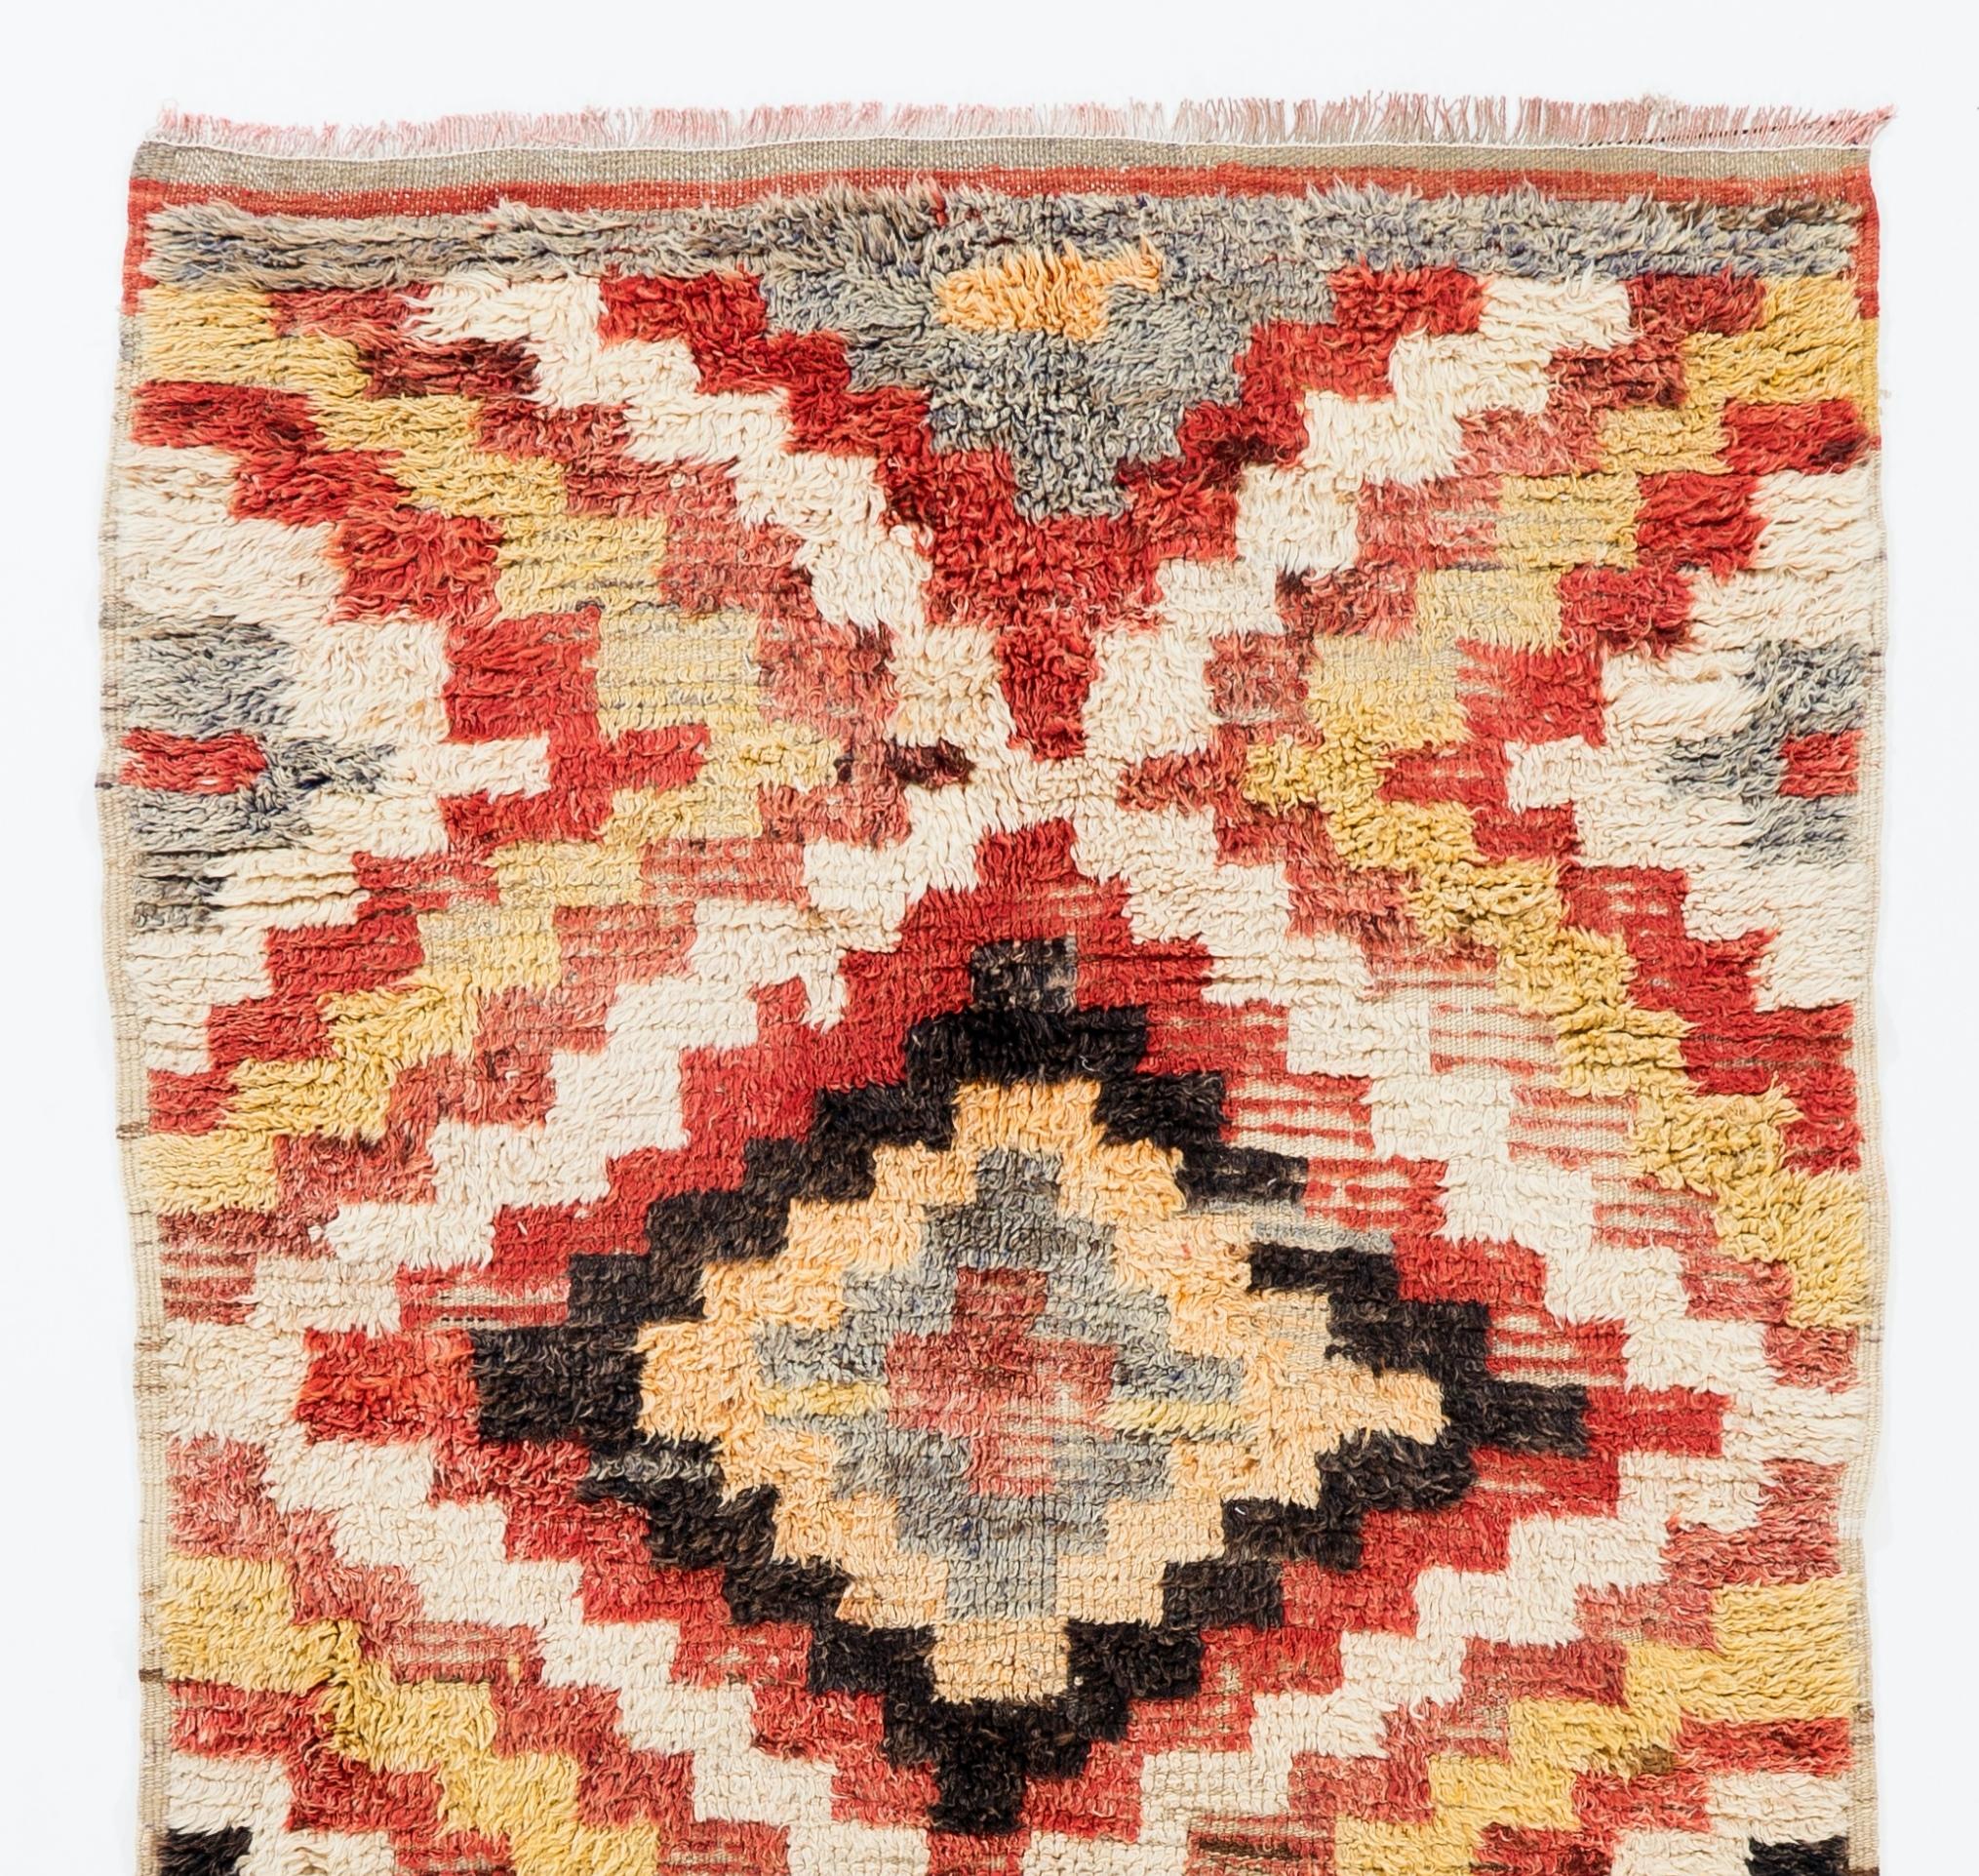 A handmade mid-century 'Tulu' (Turkish word for 'thick piled') runner rug from Konya in Central Turkey. The rug is made of 100% wool, therefore it is very soft and comfortable. Measures: 4.2 x 8 Ft.

These simple rugs with geometric modern designs